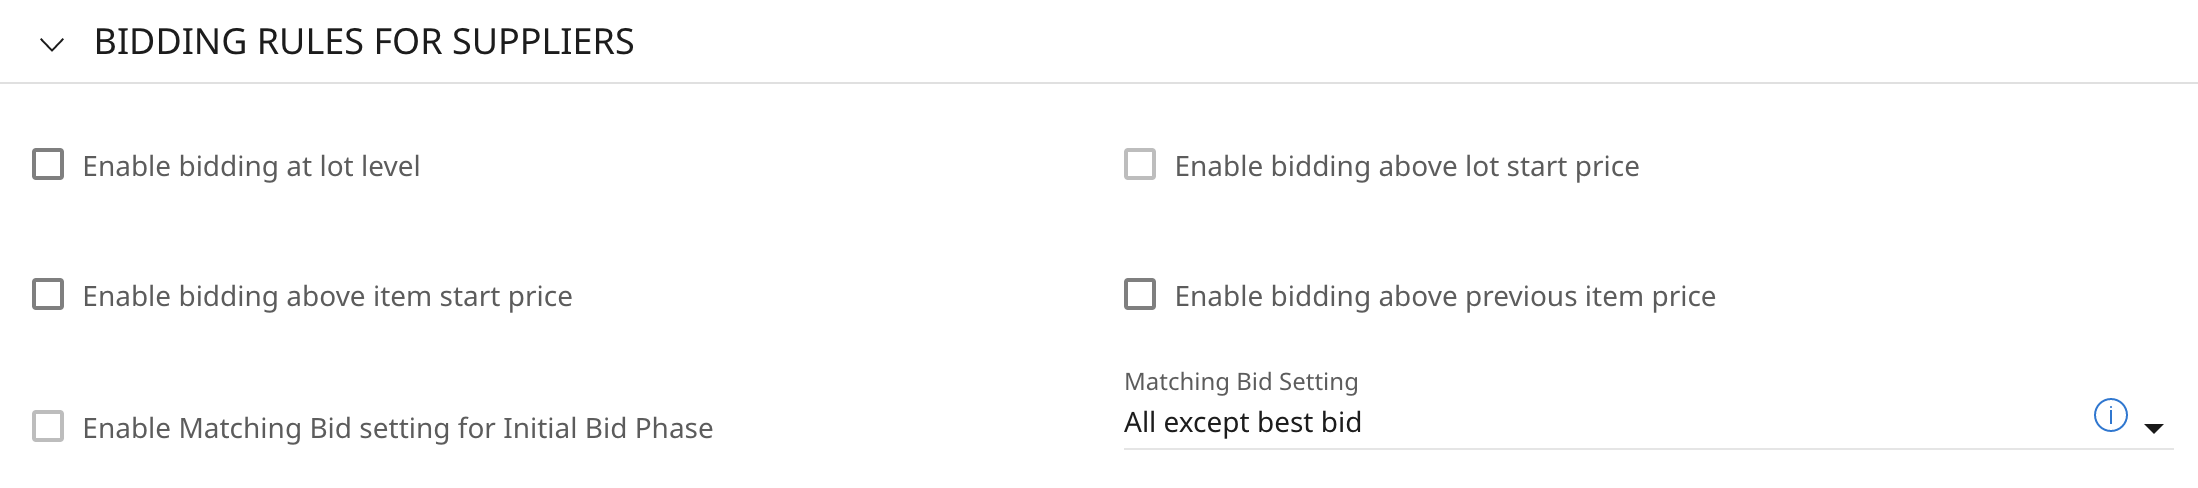 bidding-rules-for-suppliers-settings.png